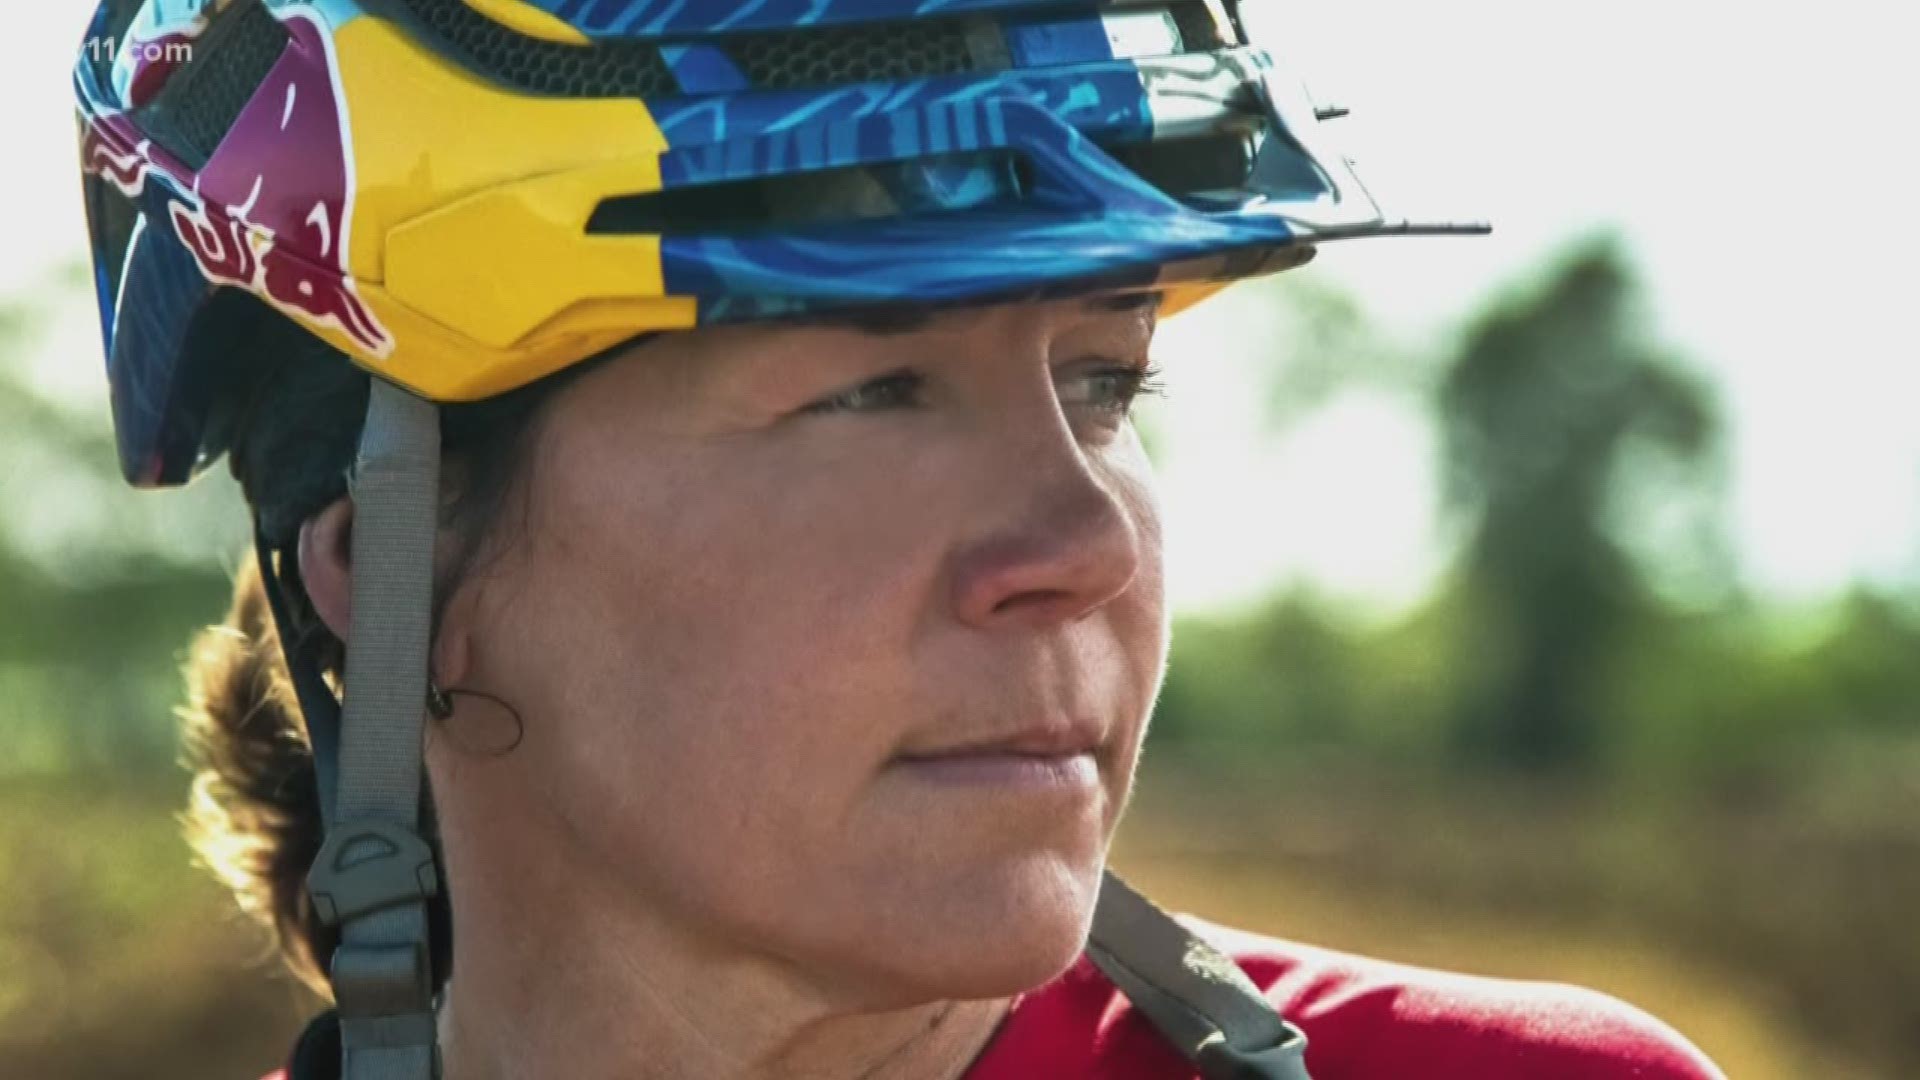 One woman begins her over 1,000 mile journey on a bike all around Arkansas.